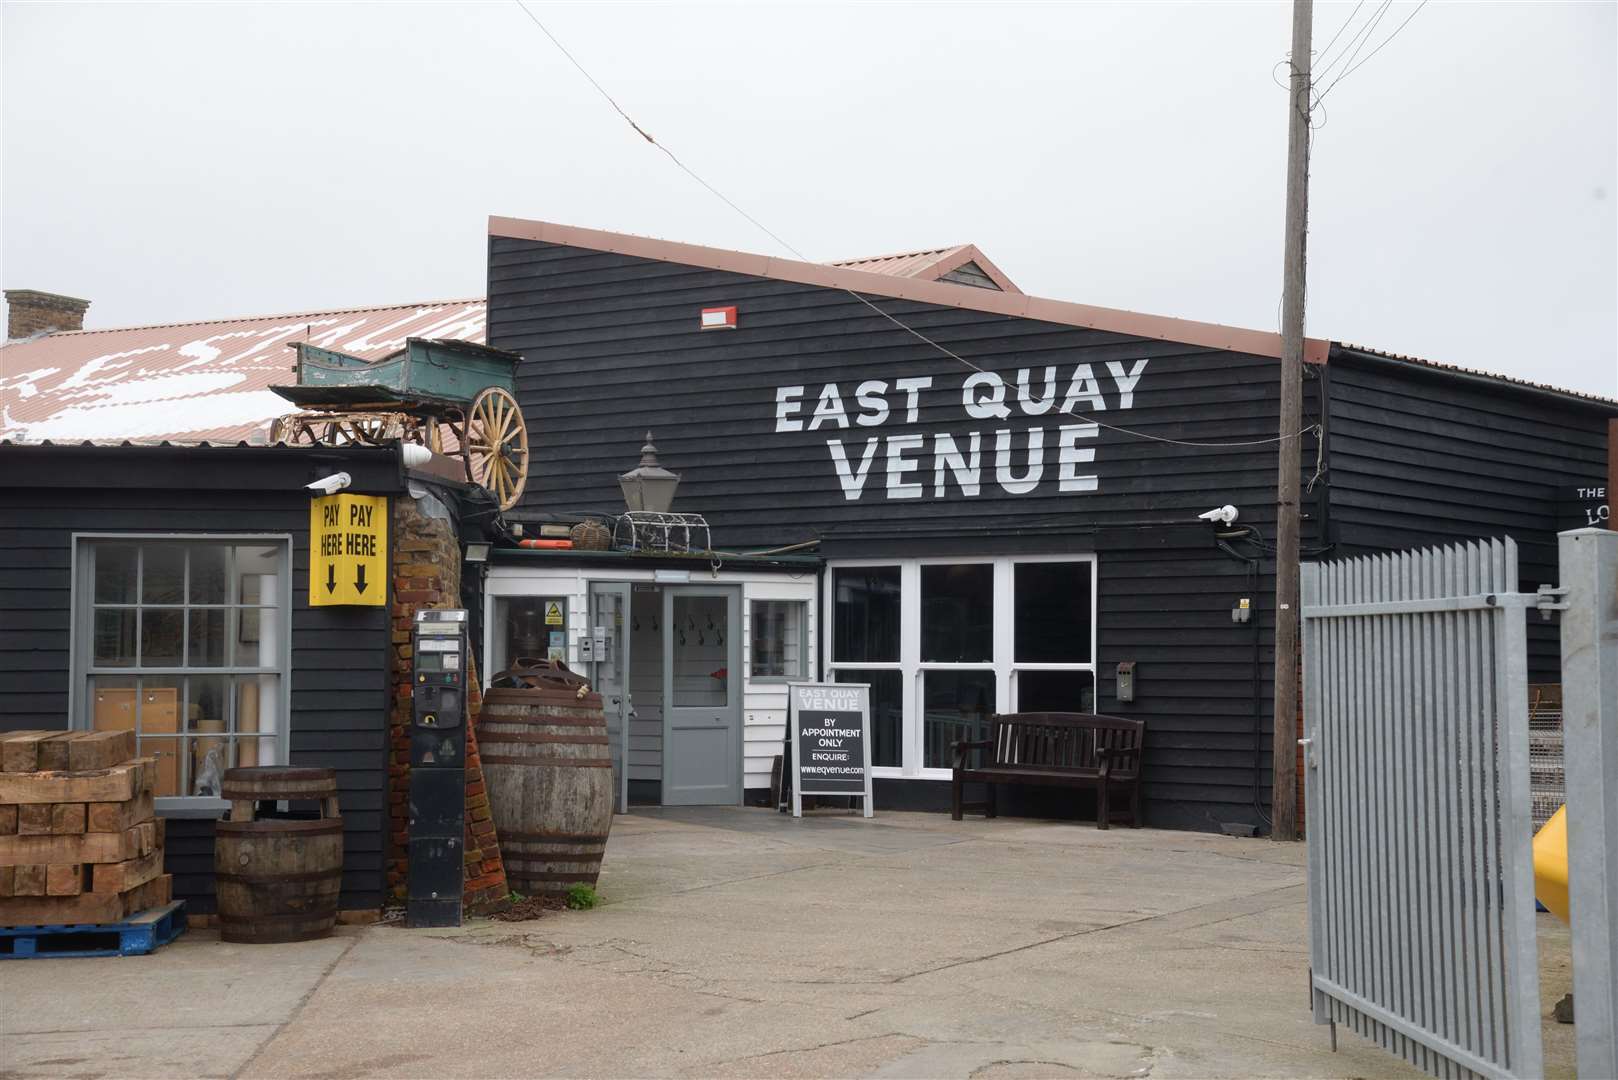 The couple had planned to marry at the trendy East Quay Venue in Whitstable